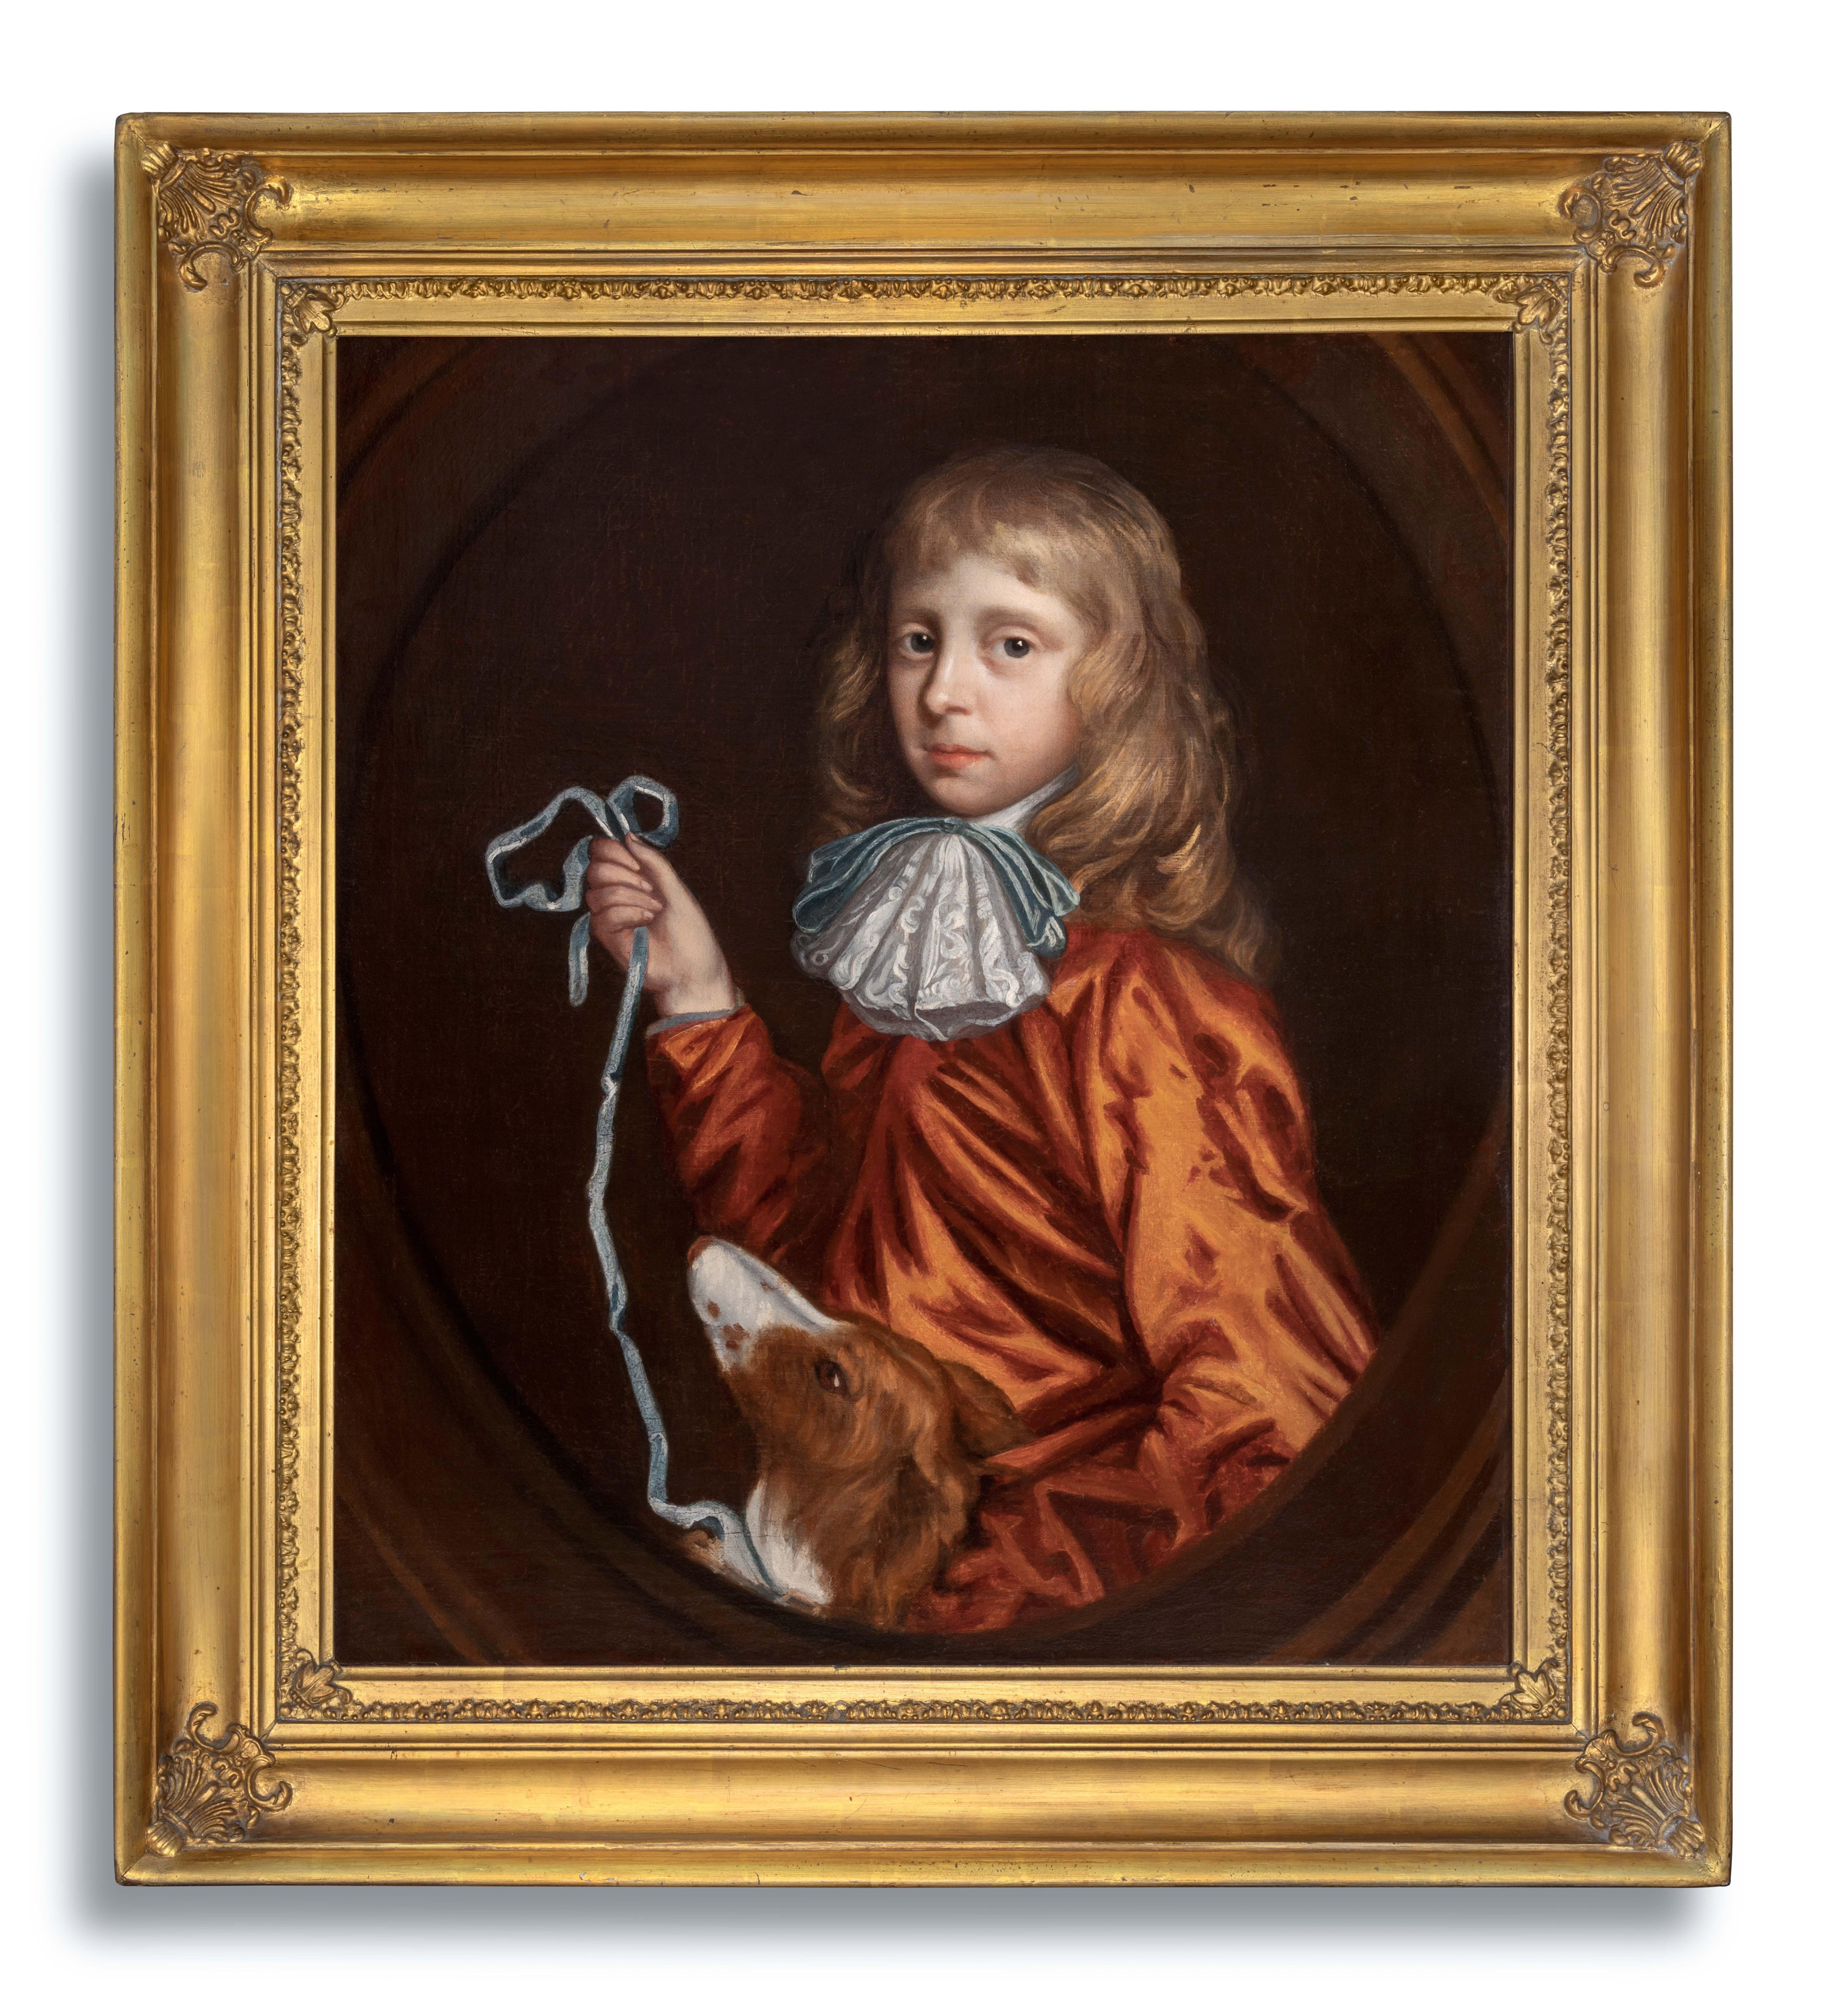 Portrait of a Young Gentleman and Pet Dog c.1680, Antique oil on Canvas Painting